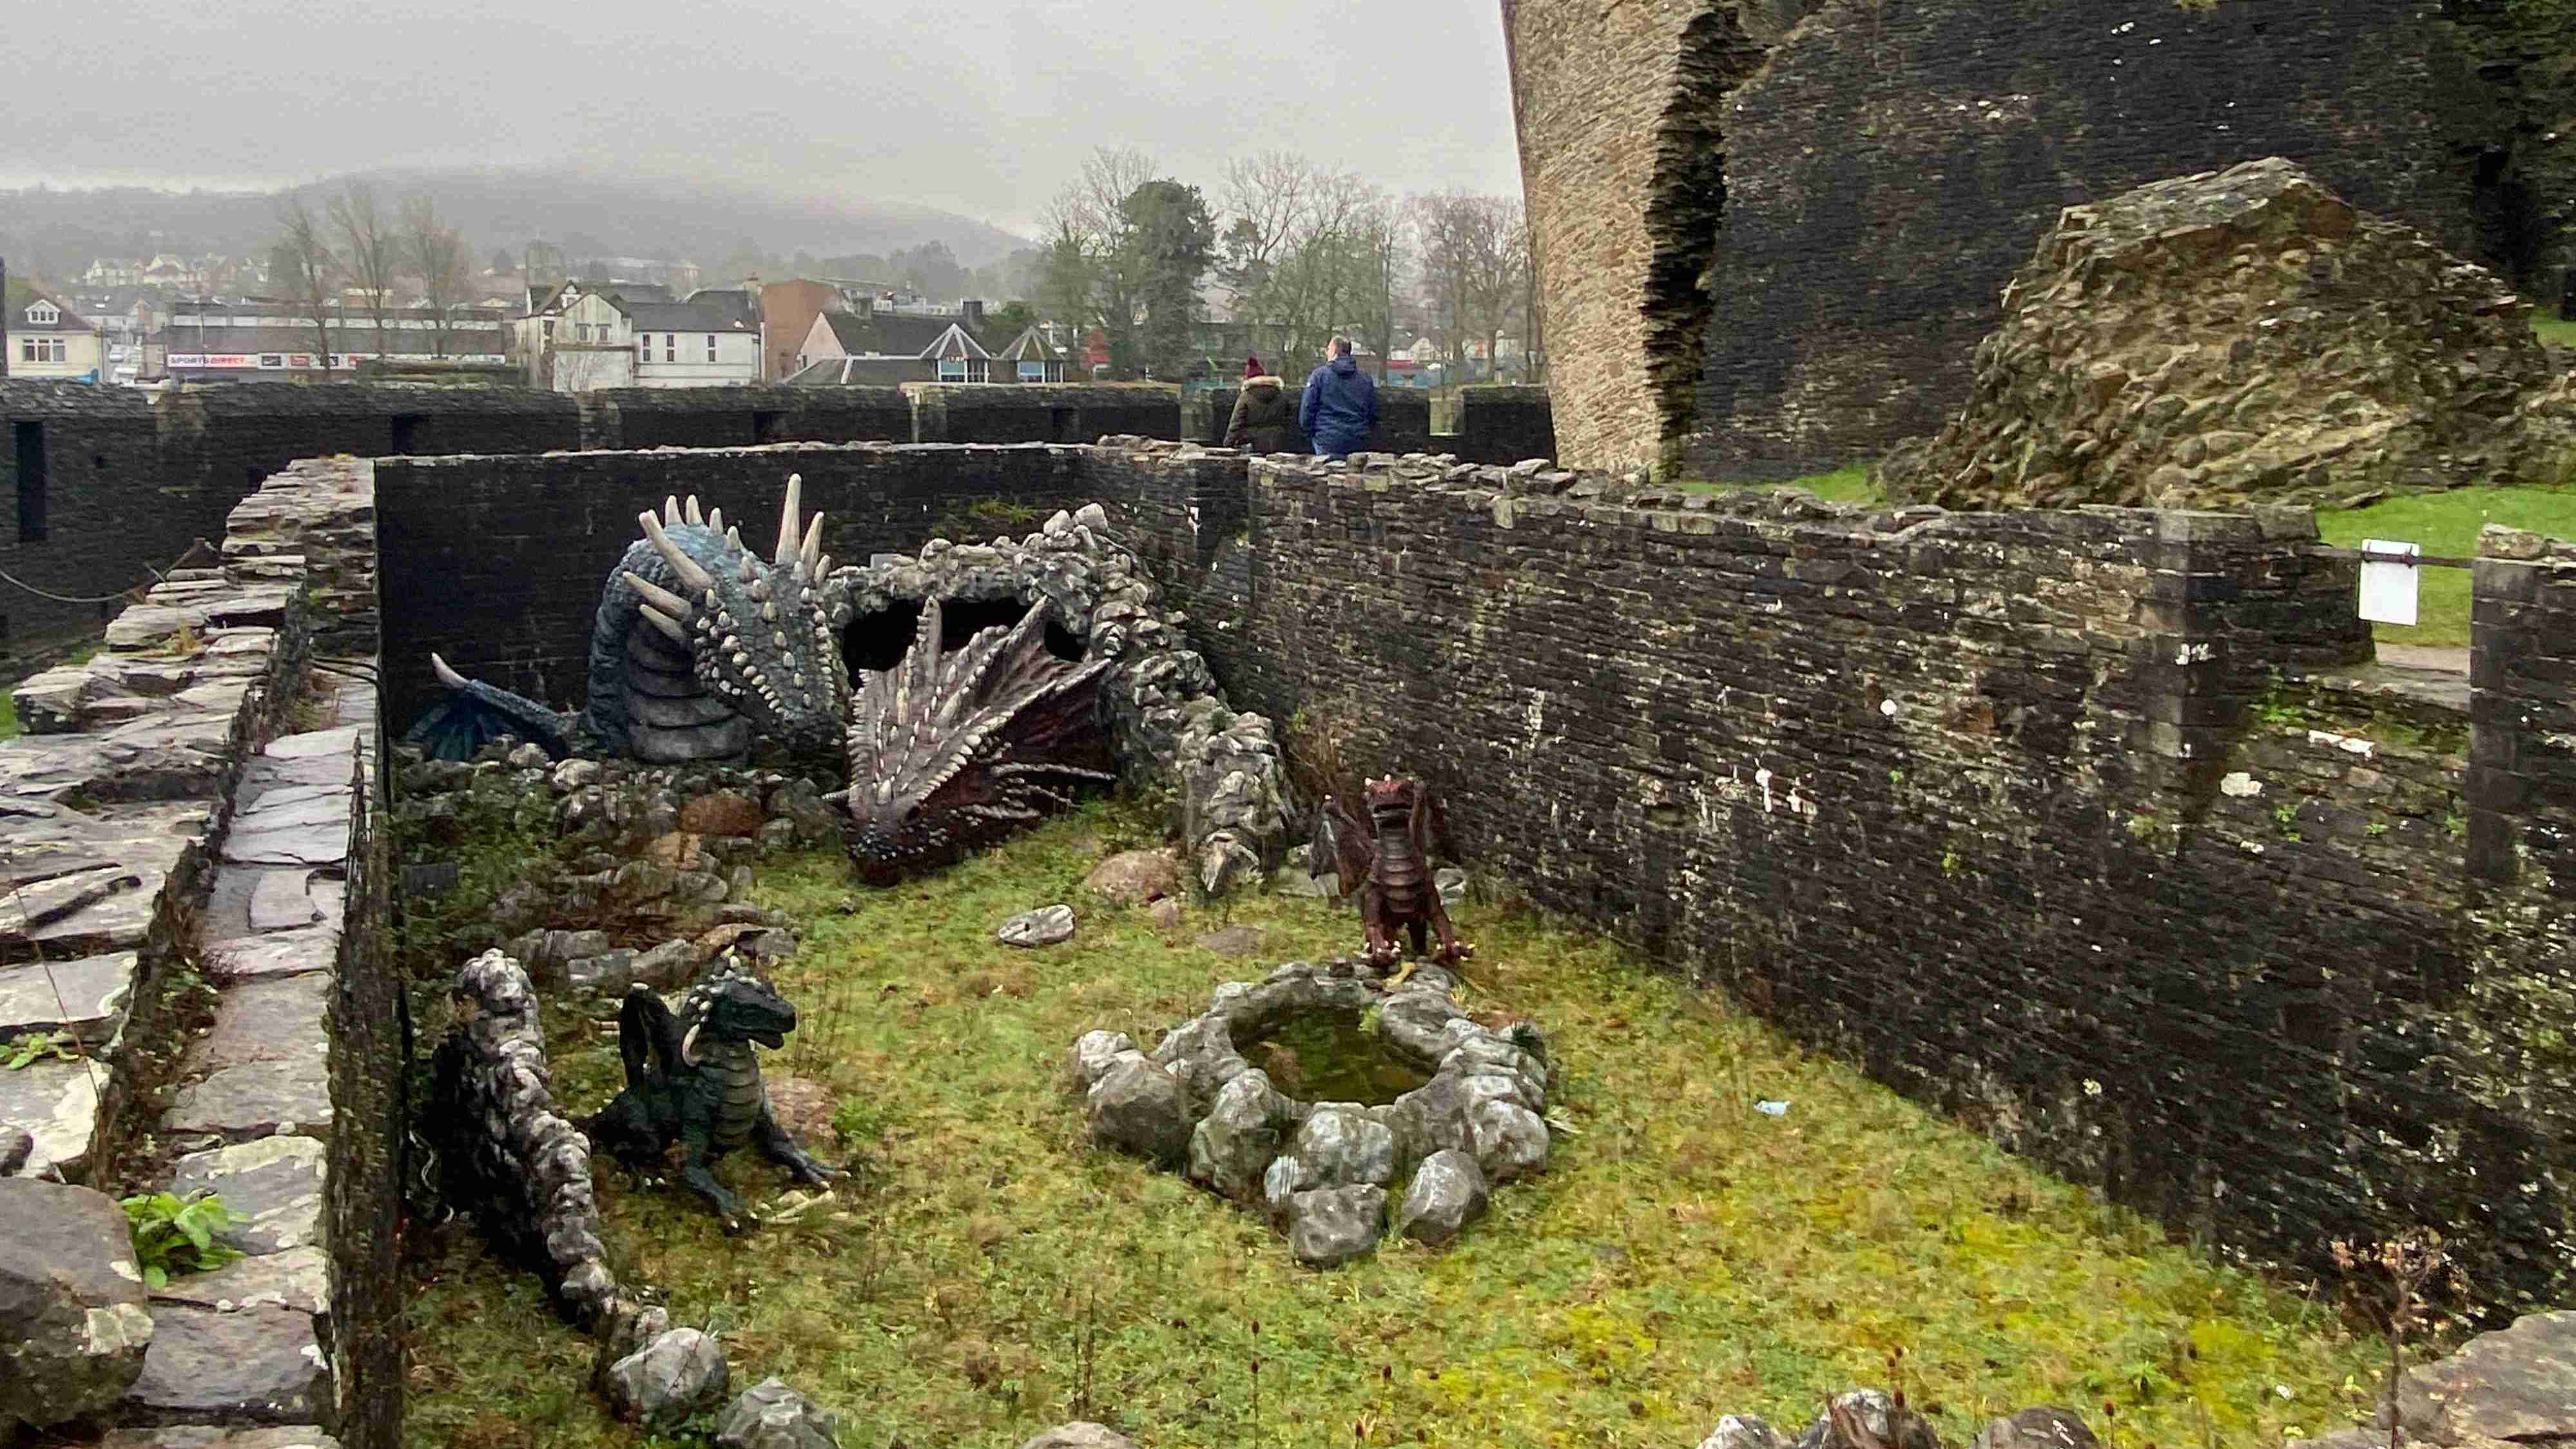 The dragon statue in Caerphilly Castle, Wales, UK. /Iolo ap Dafydd, CGTN Europe